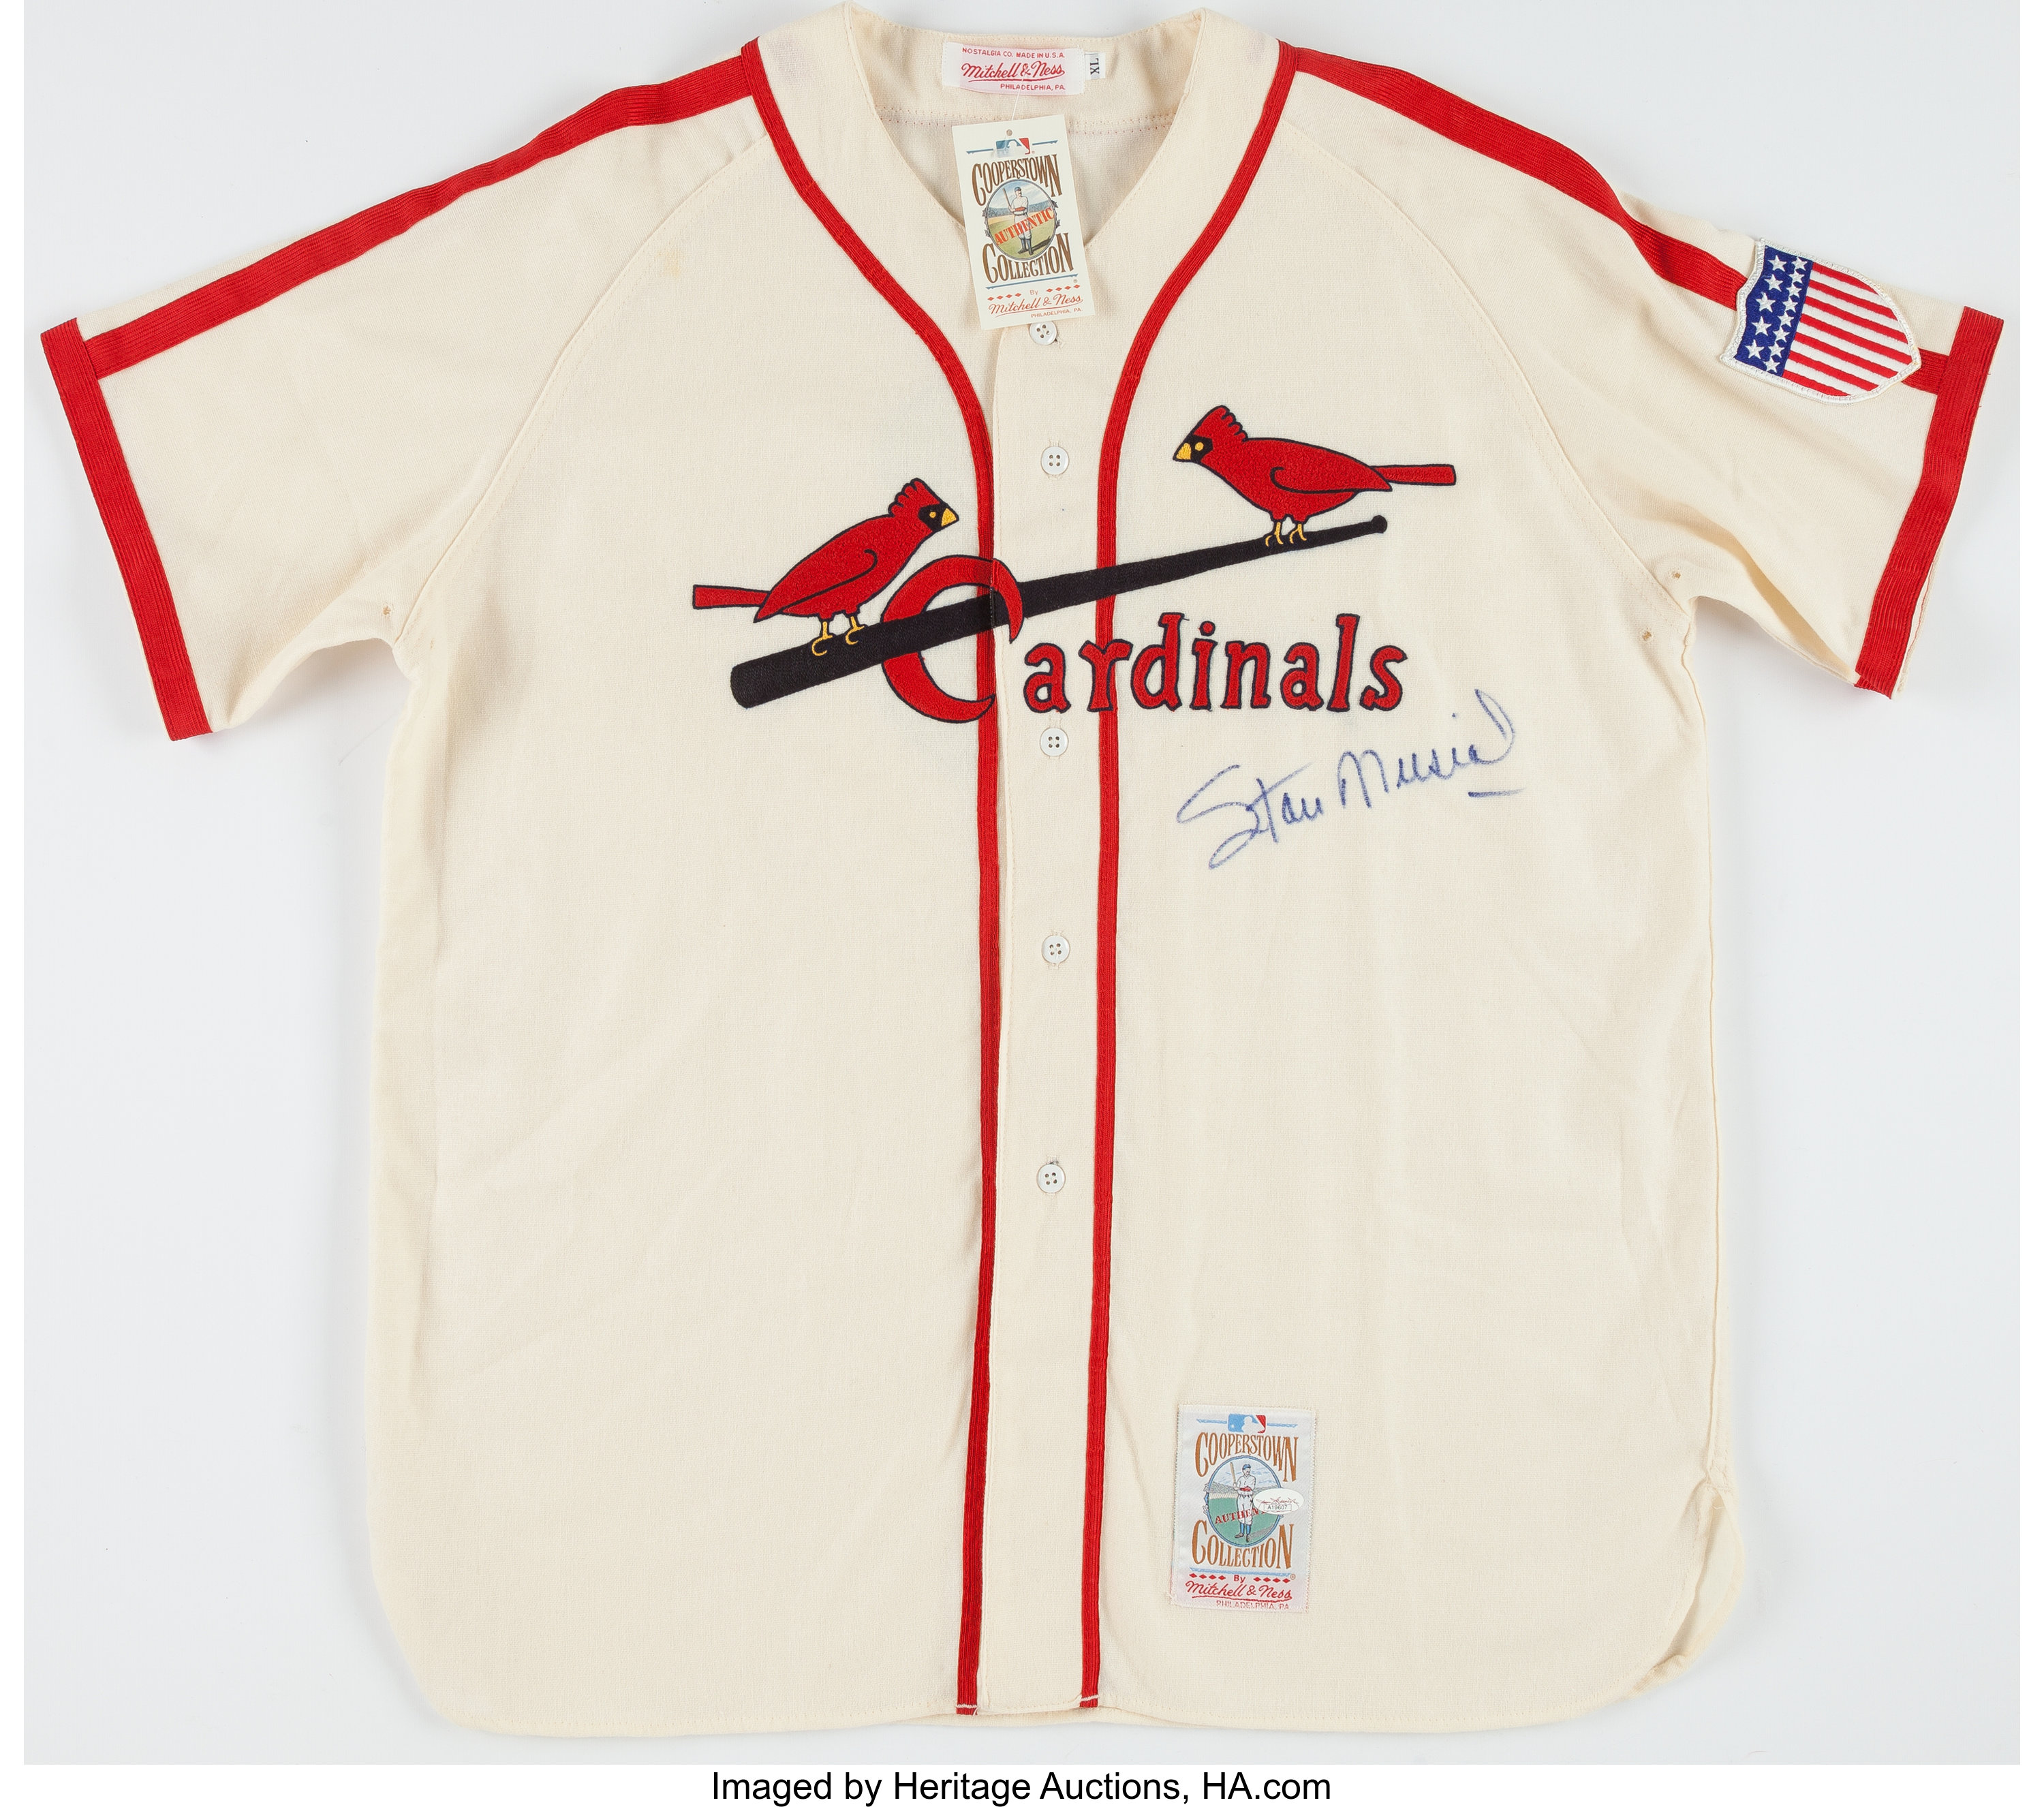 stan musial signed jersey